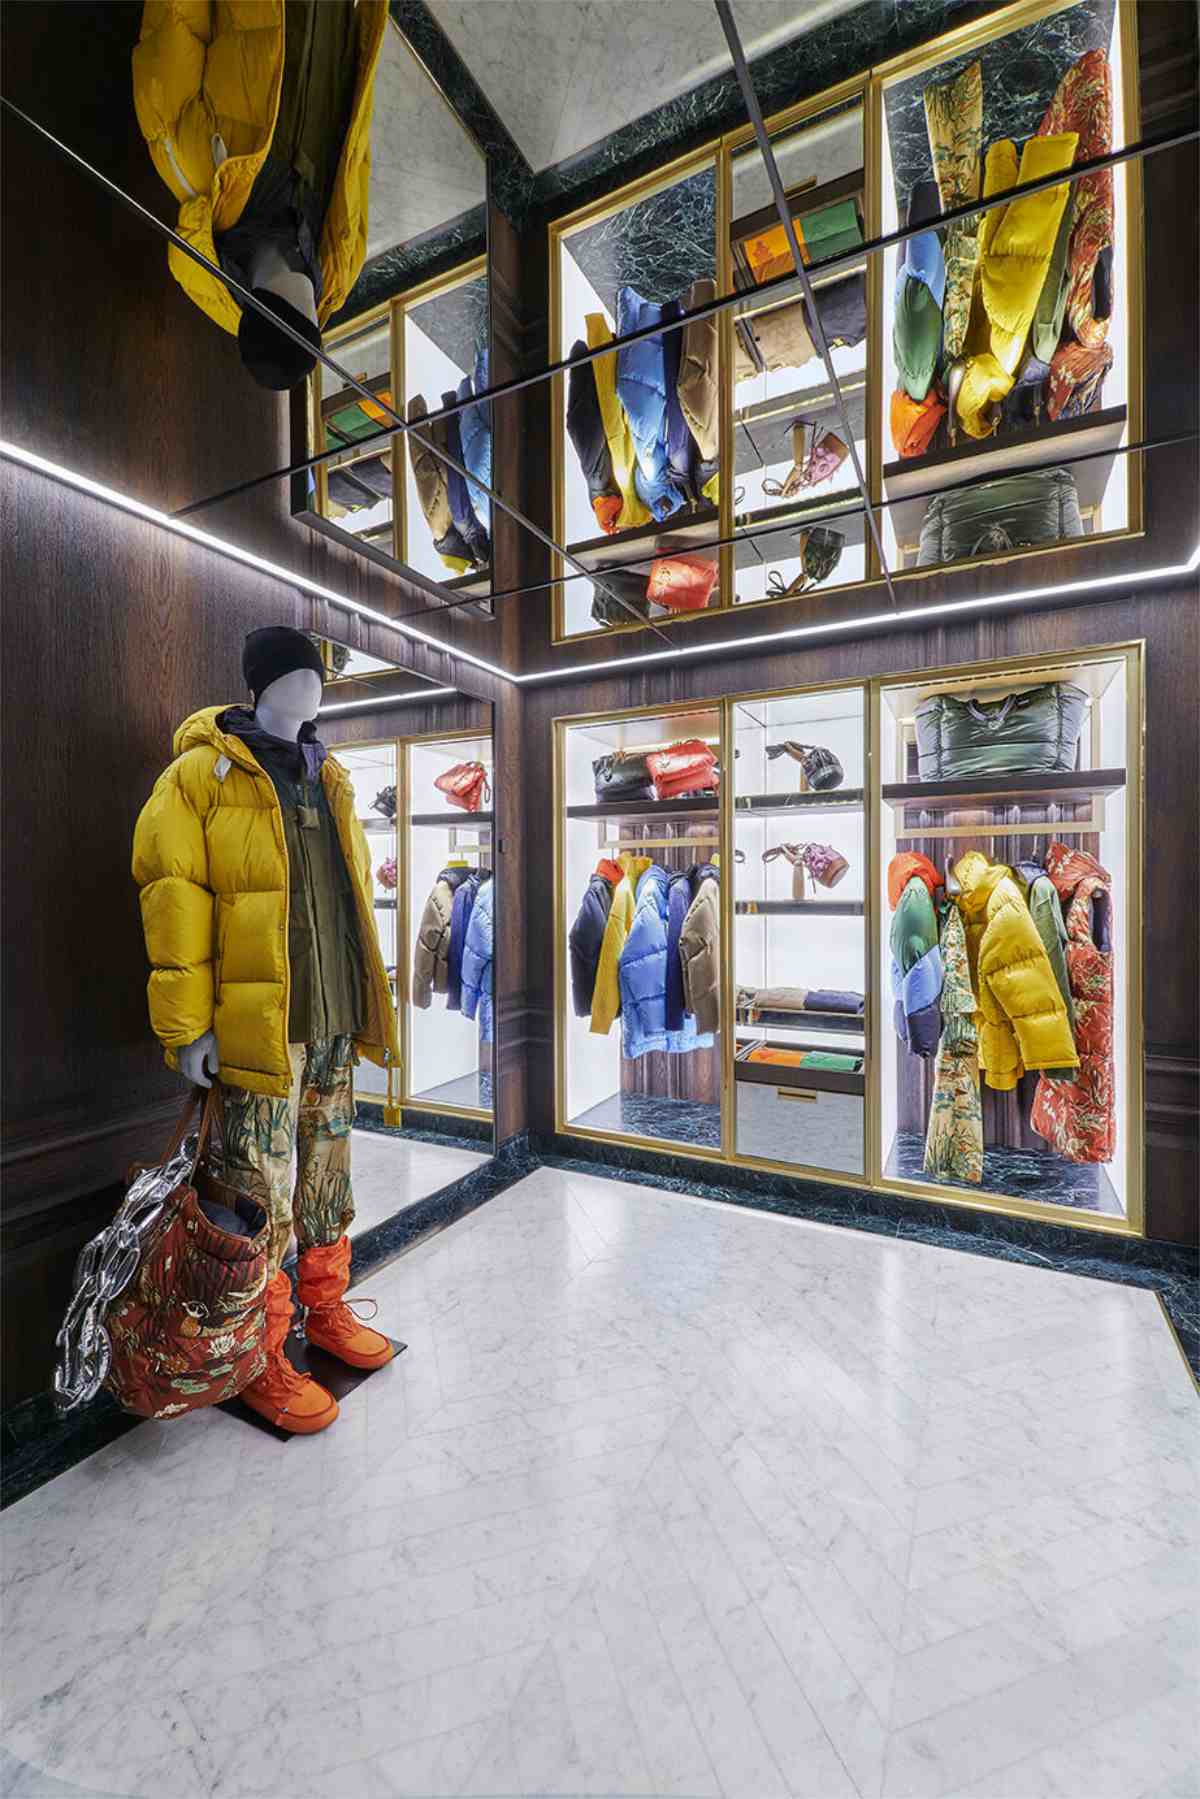 New openings of luxury boutiques - December 2020